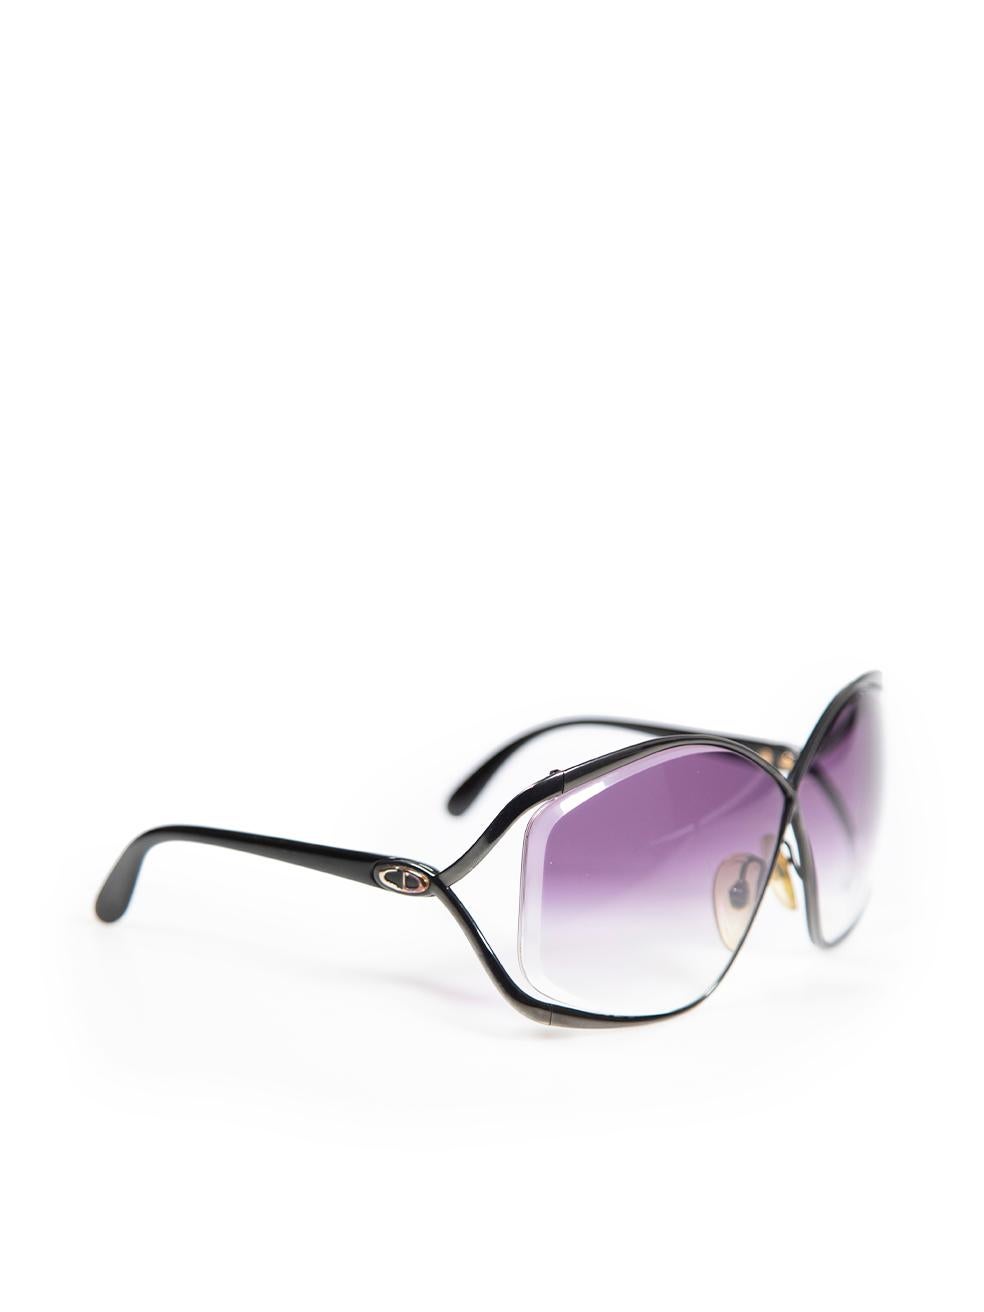 CONDITION is Good. Minor wear to sunglasses is evident. Light wear to lenses, with some very small scratches on this used Christian Dior designer resale item.
 
 Details
 Model: Butterfly
 Vintage
 Purple
 Plastic
 Sunglasses
 Black square frames
